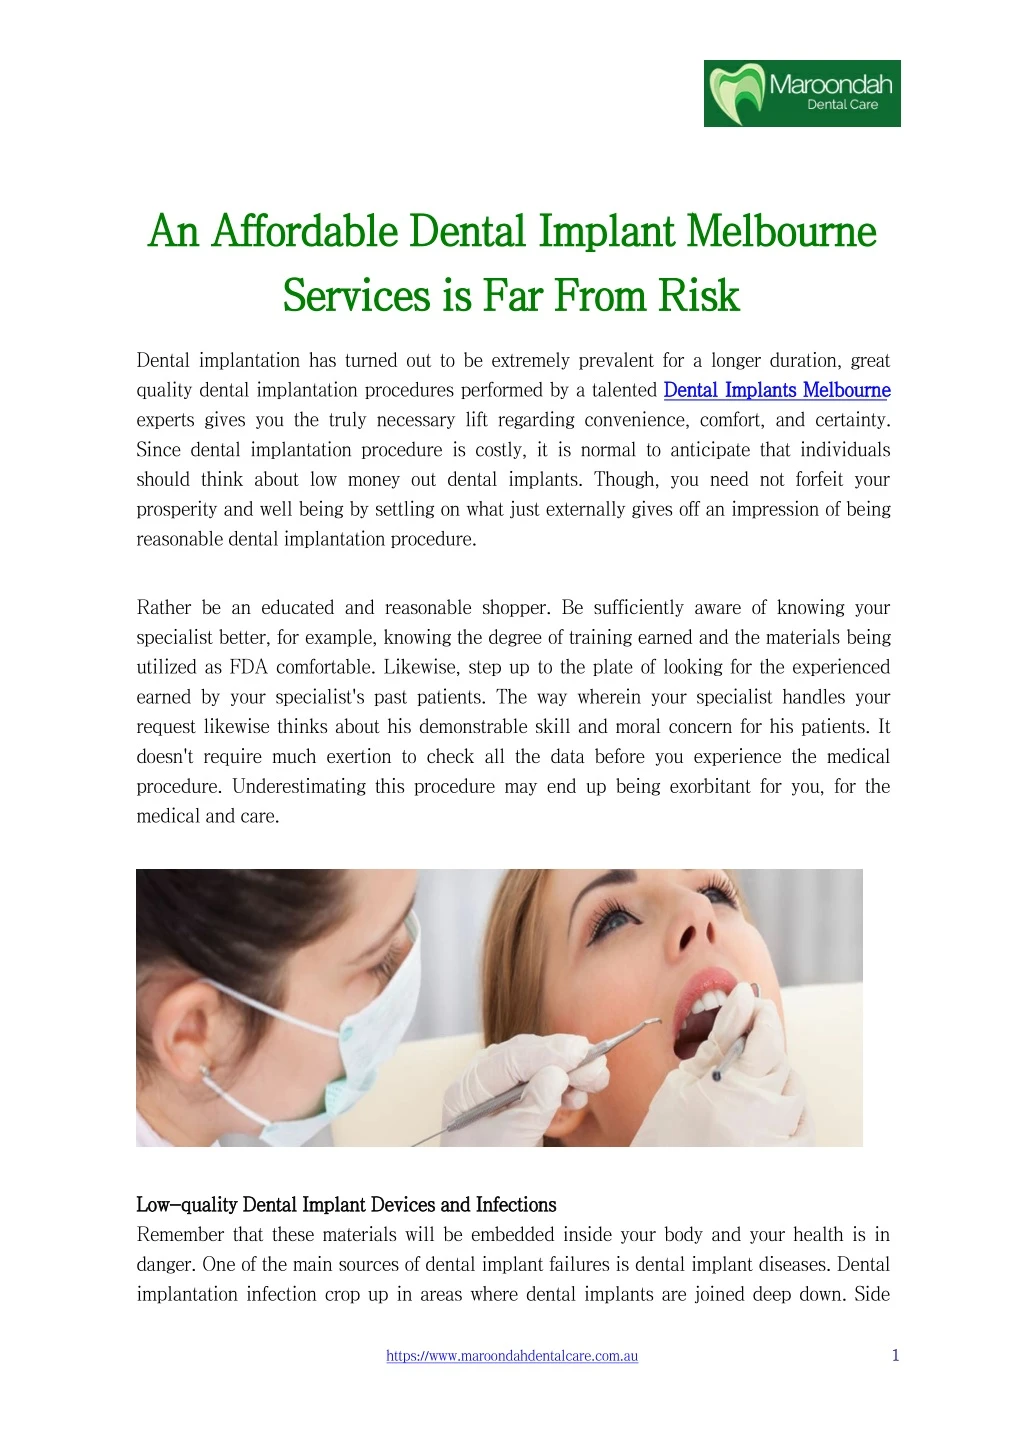 an an a affordable ffordable d dental services